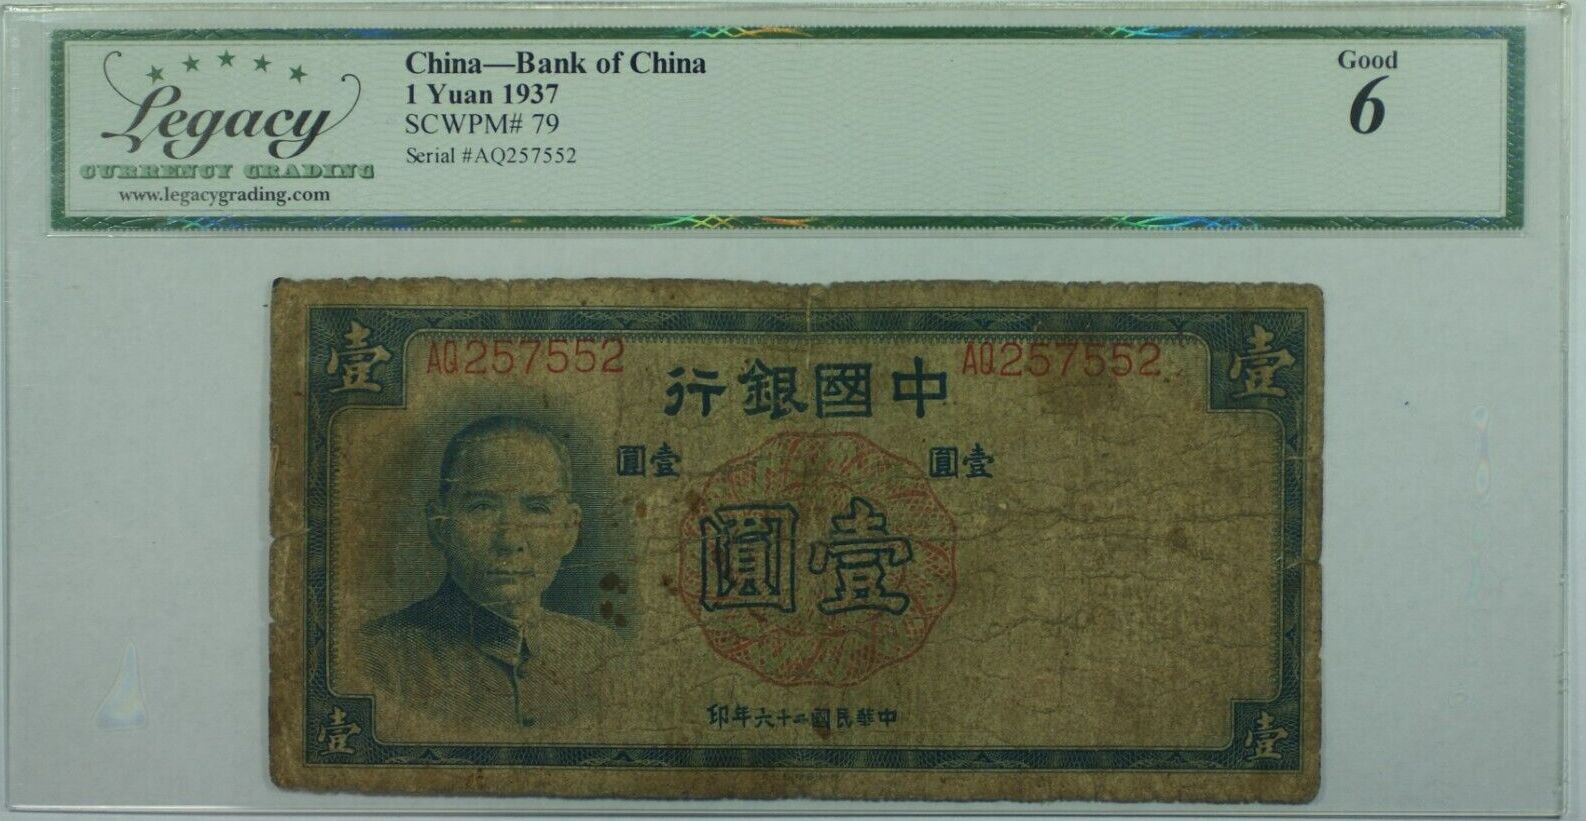 Banknoten 1937 China--Bank of China 1 Yuan Note SCWPM#79 Legacy Good-6  w/Comments Legacy Good-6 with Comments | MA-Shops